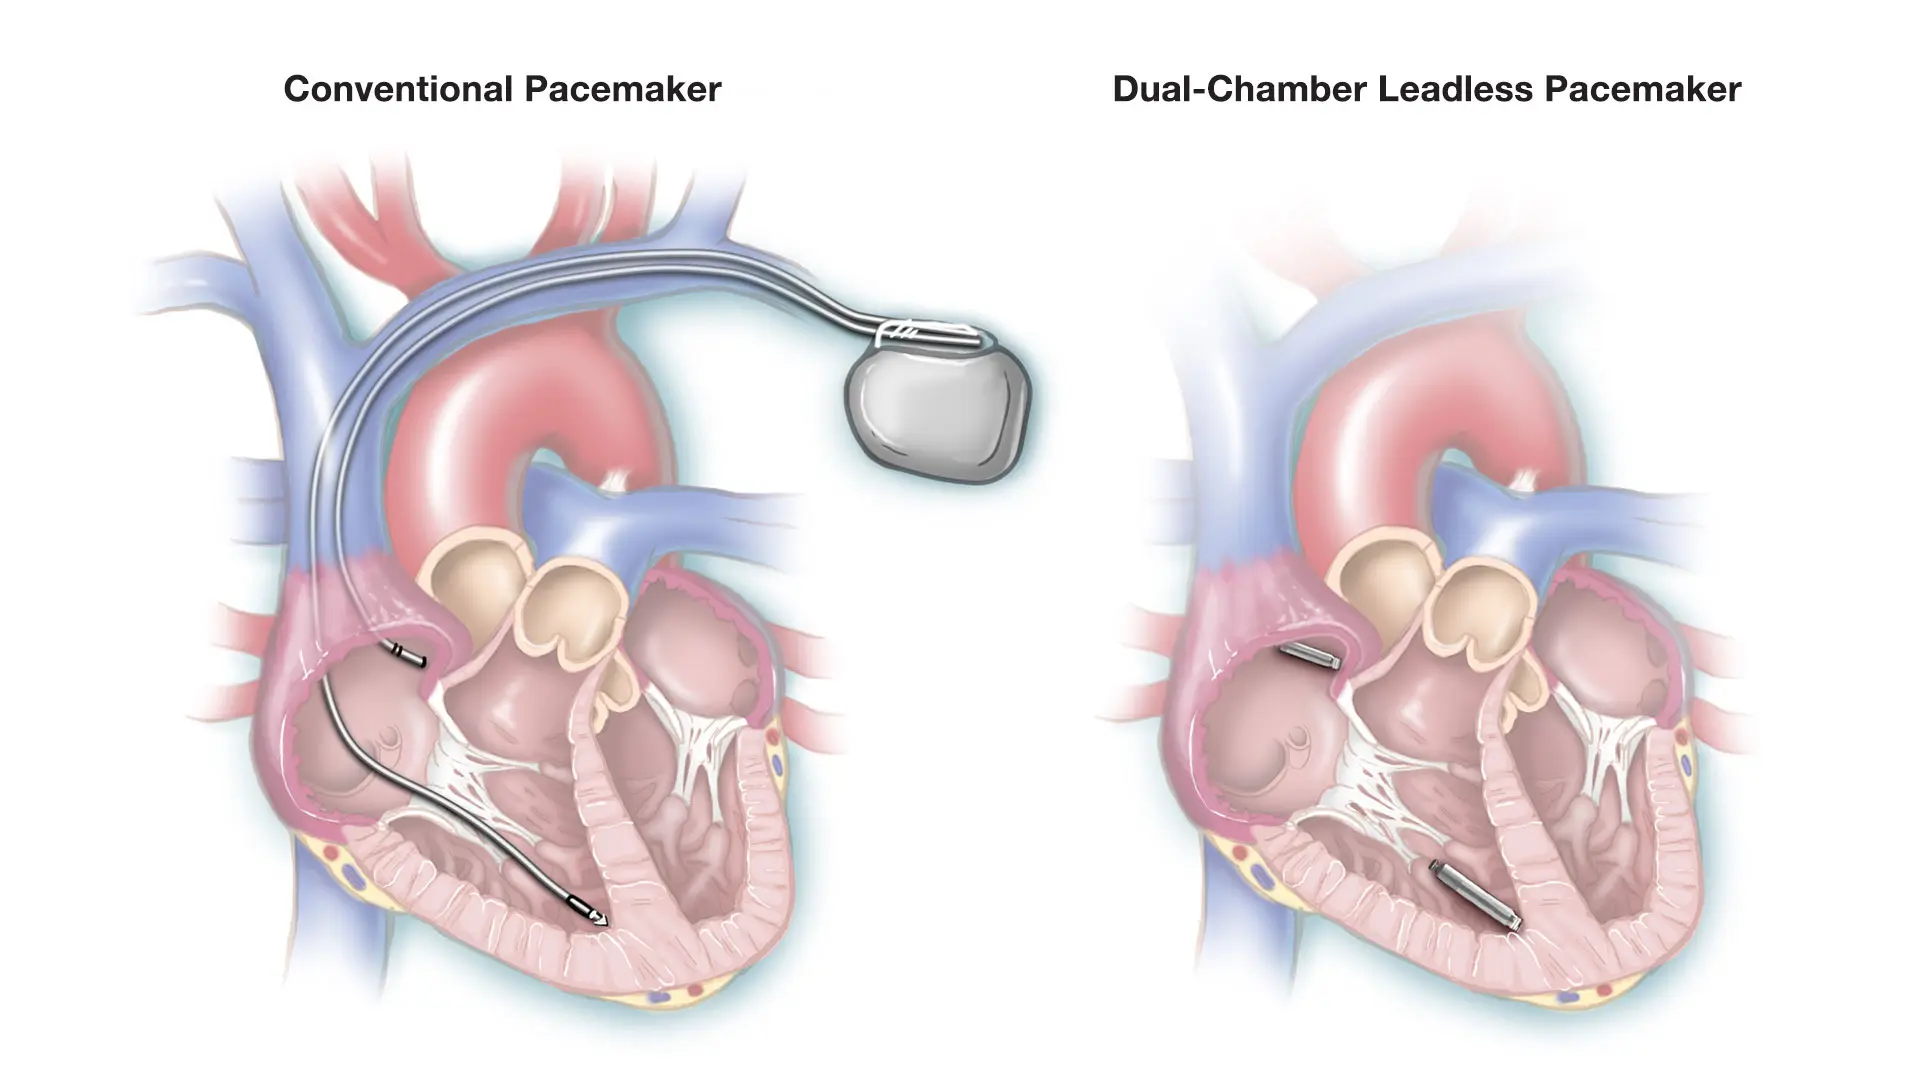 A traditional system with leads and pacemaker generator, left, and the leadless system with two devices that communicate with each other. 



